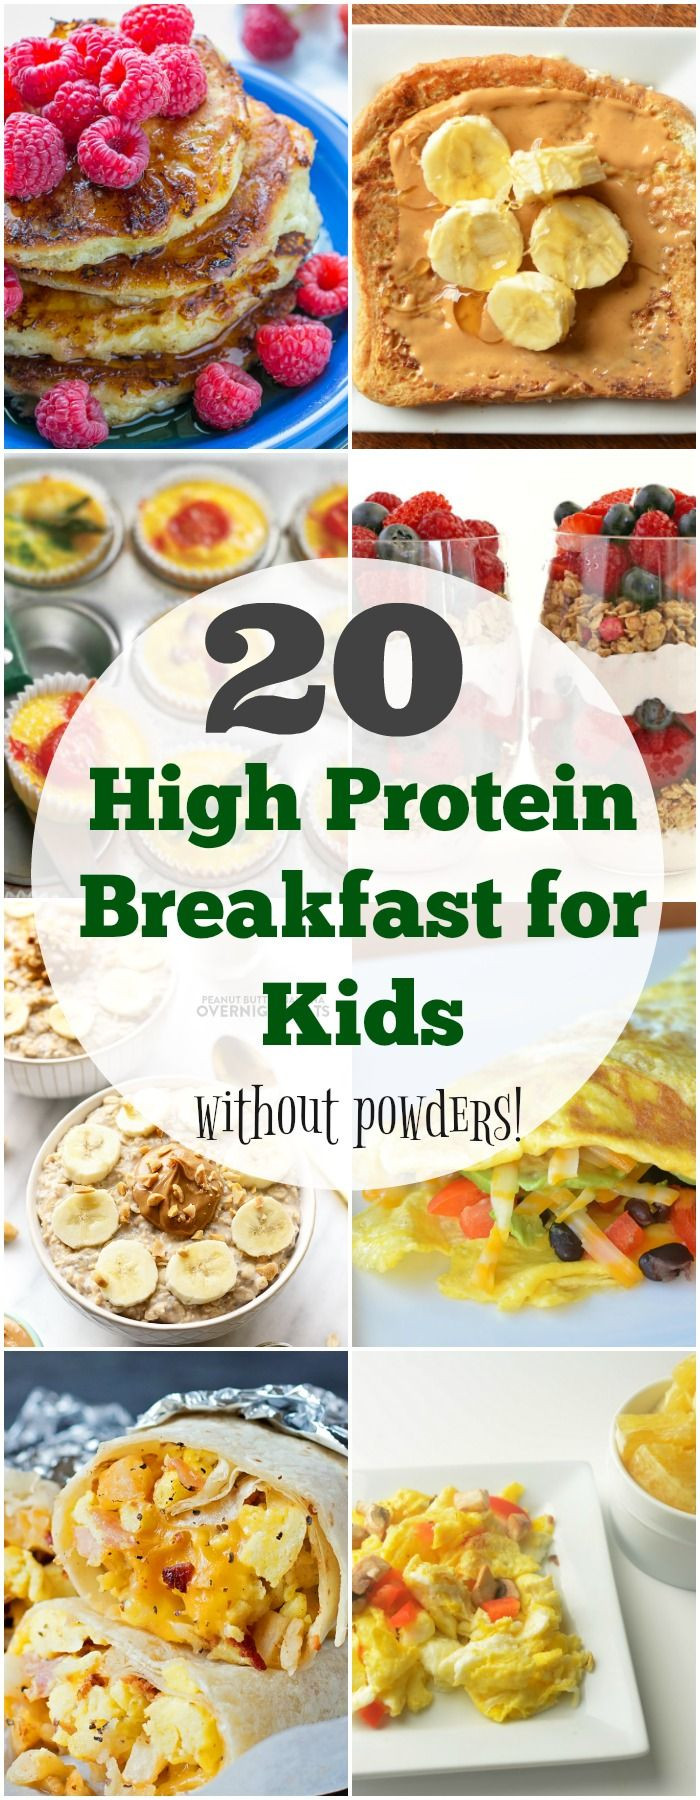 Healthy High Protein Breakfast Ideas
 Healthy Recipes Recipes and cooking 20 of the best high